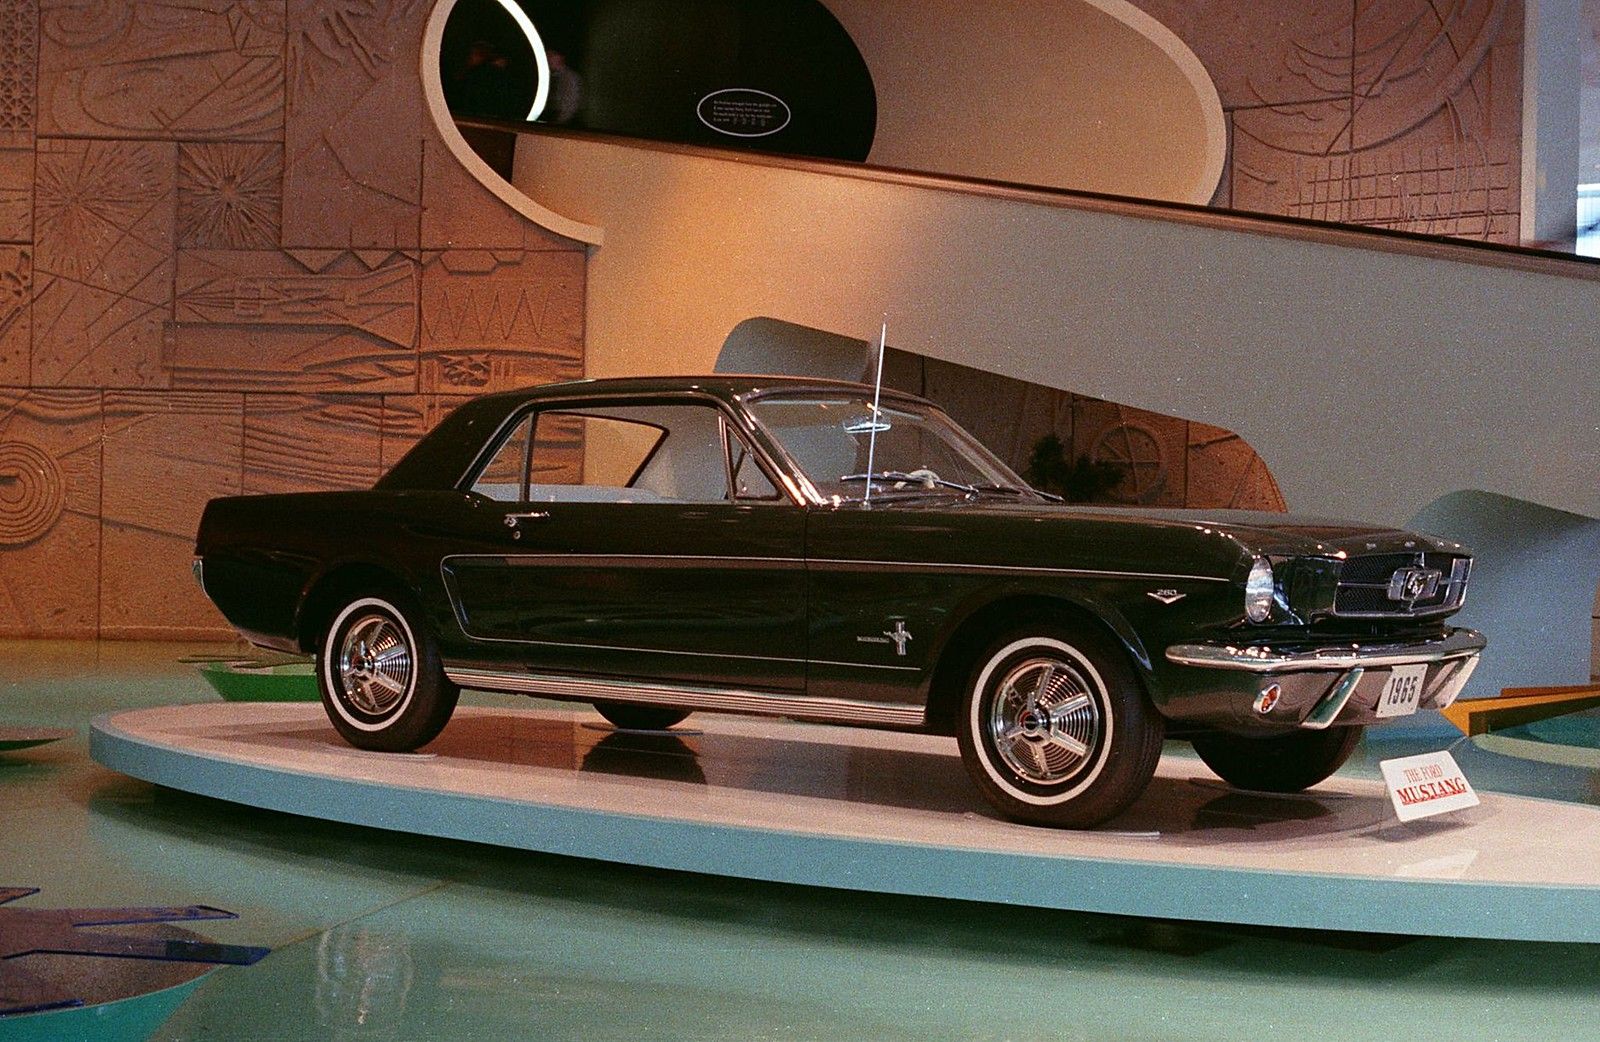 A black ’65 Mustang at the 1964-65 World’s Fair in New York. [Image via Flickr]